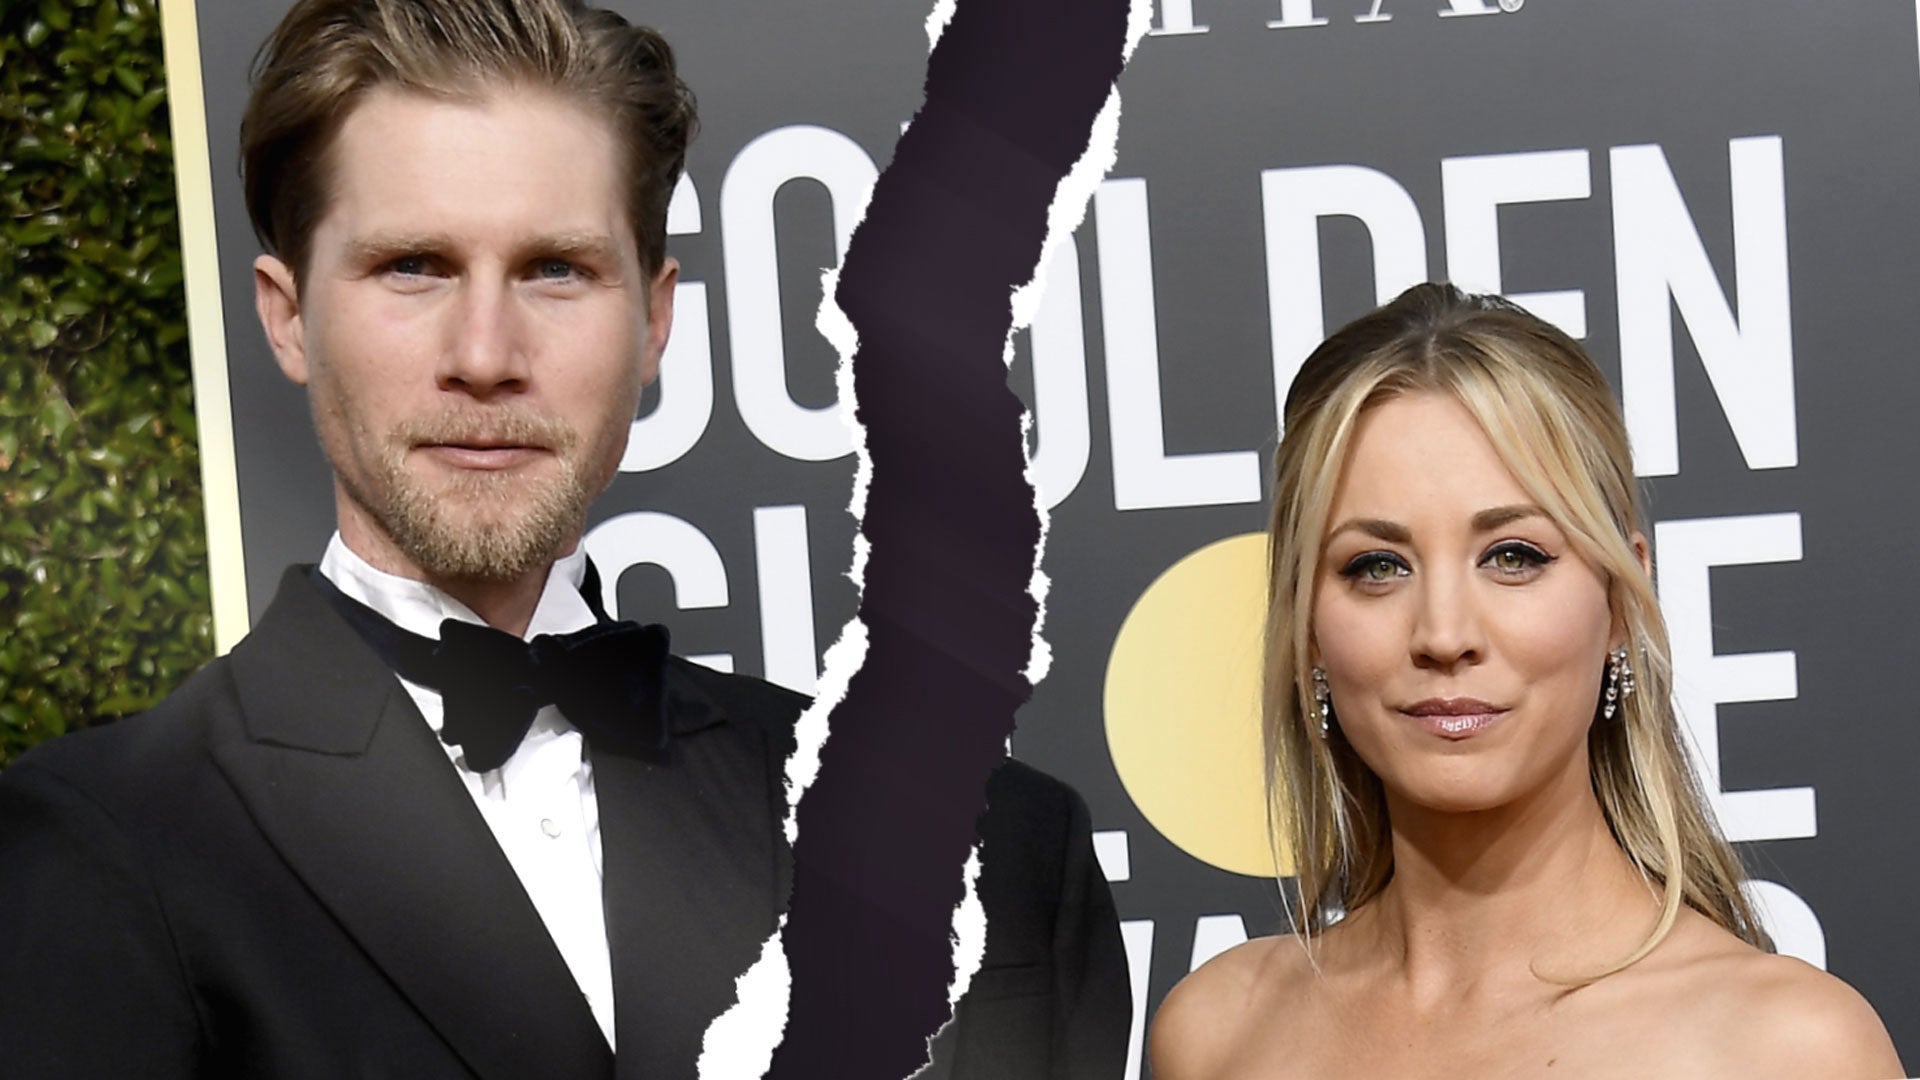 Cuoco Kaley Measurement Sex Tape - Kaley Cuoco and Karl Cook Split After Three Years of Marriage |  Entertainment Tonight